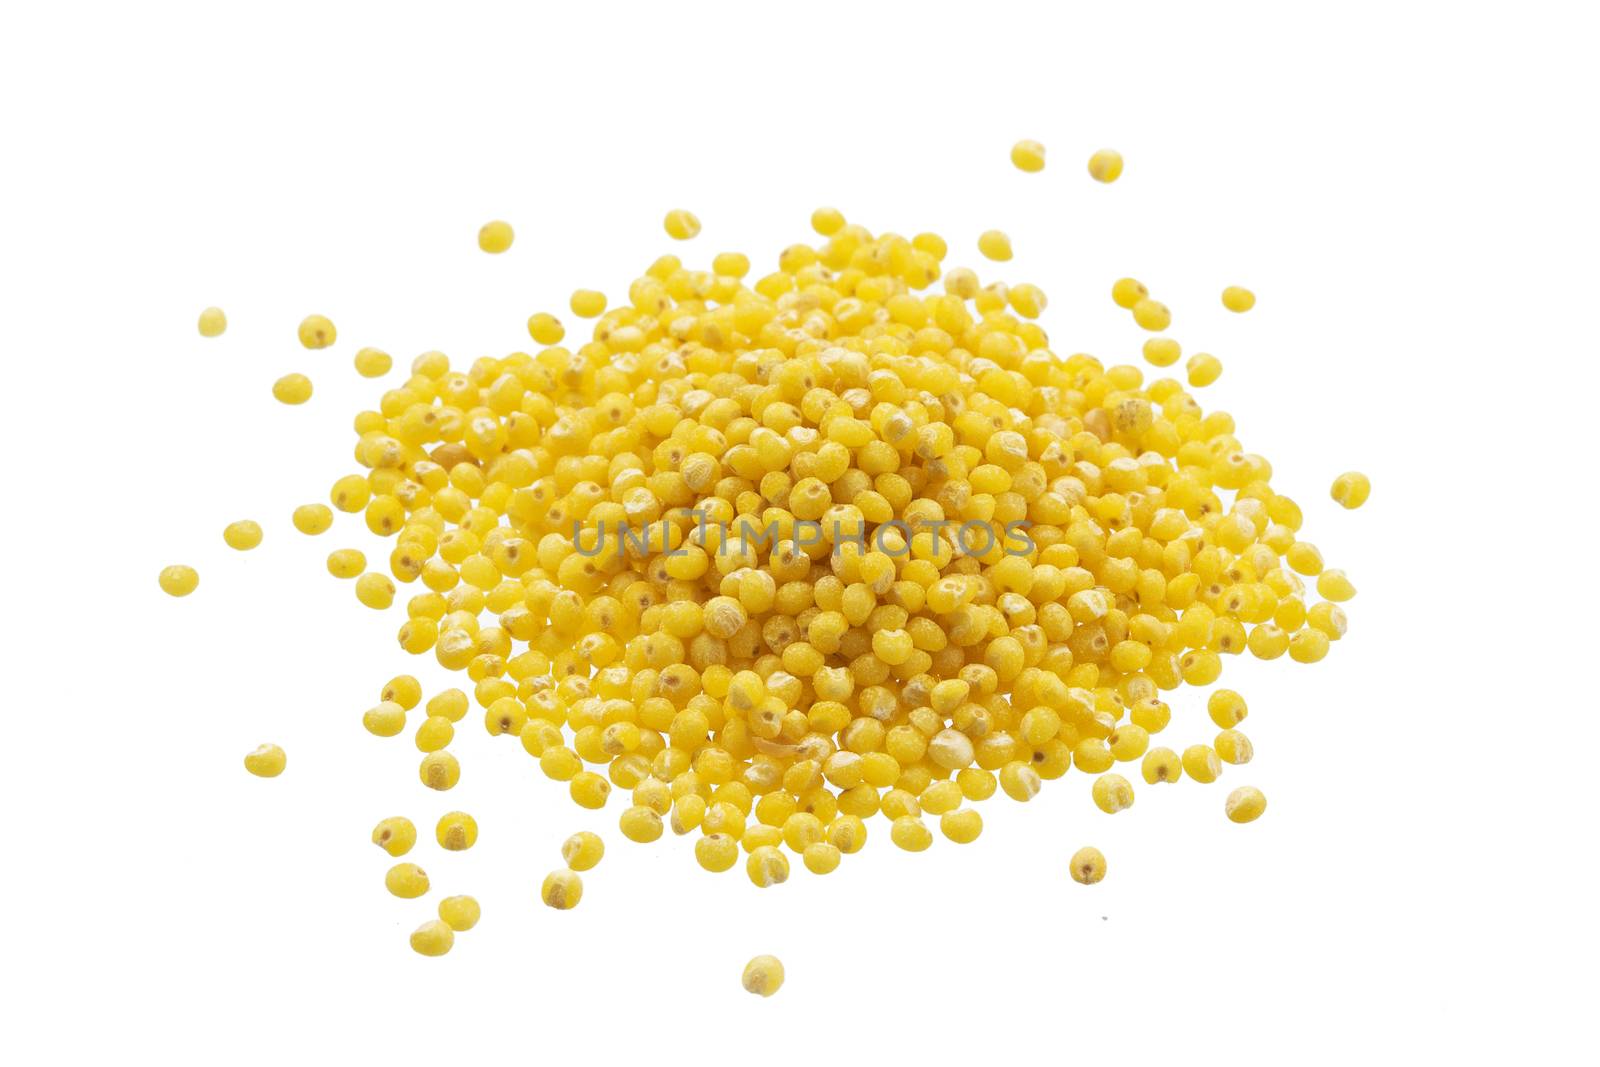 Heap of millet groats isolated on white background with clipping path. Close-up, top view.